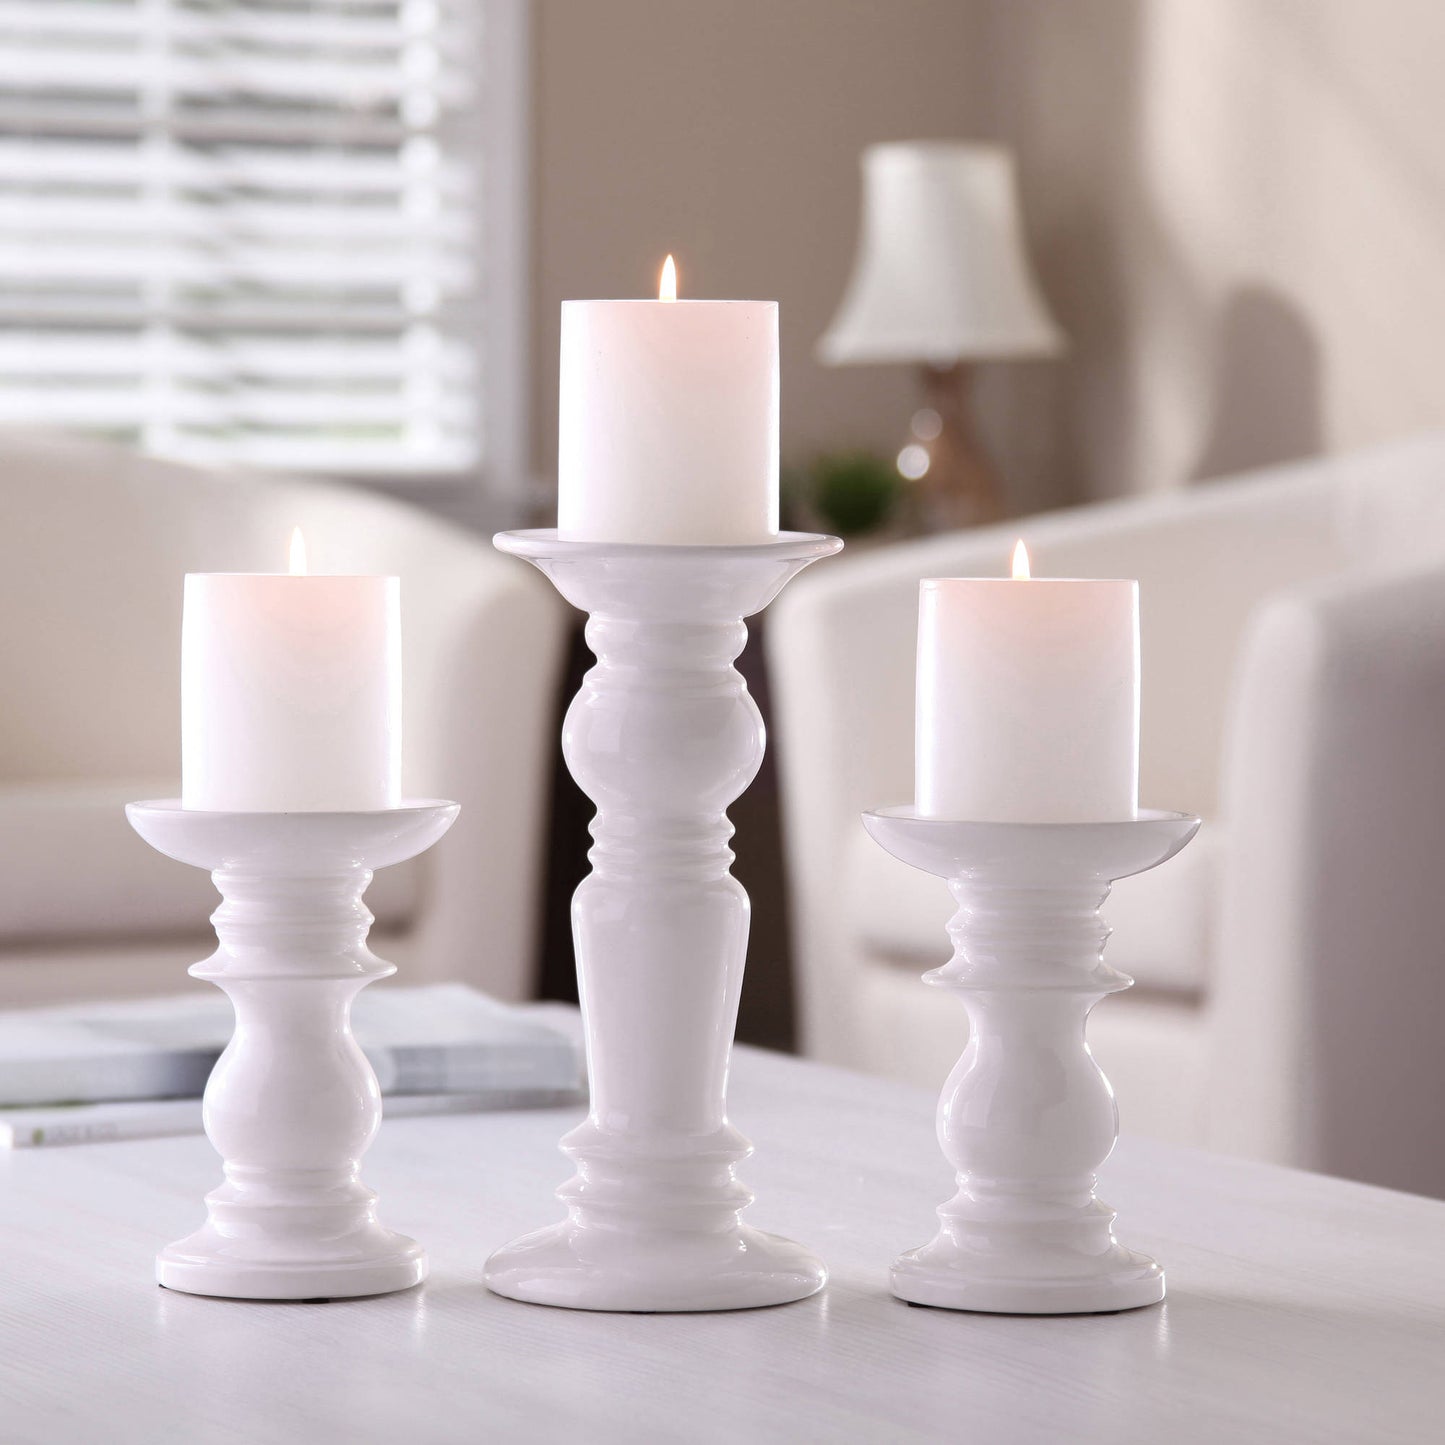 AuraDecor 3 inch & 4 inch Dia White Unscented Pillar Candle ( 3 inch Dia & 4 Inch )